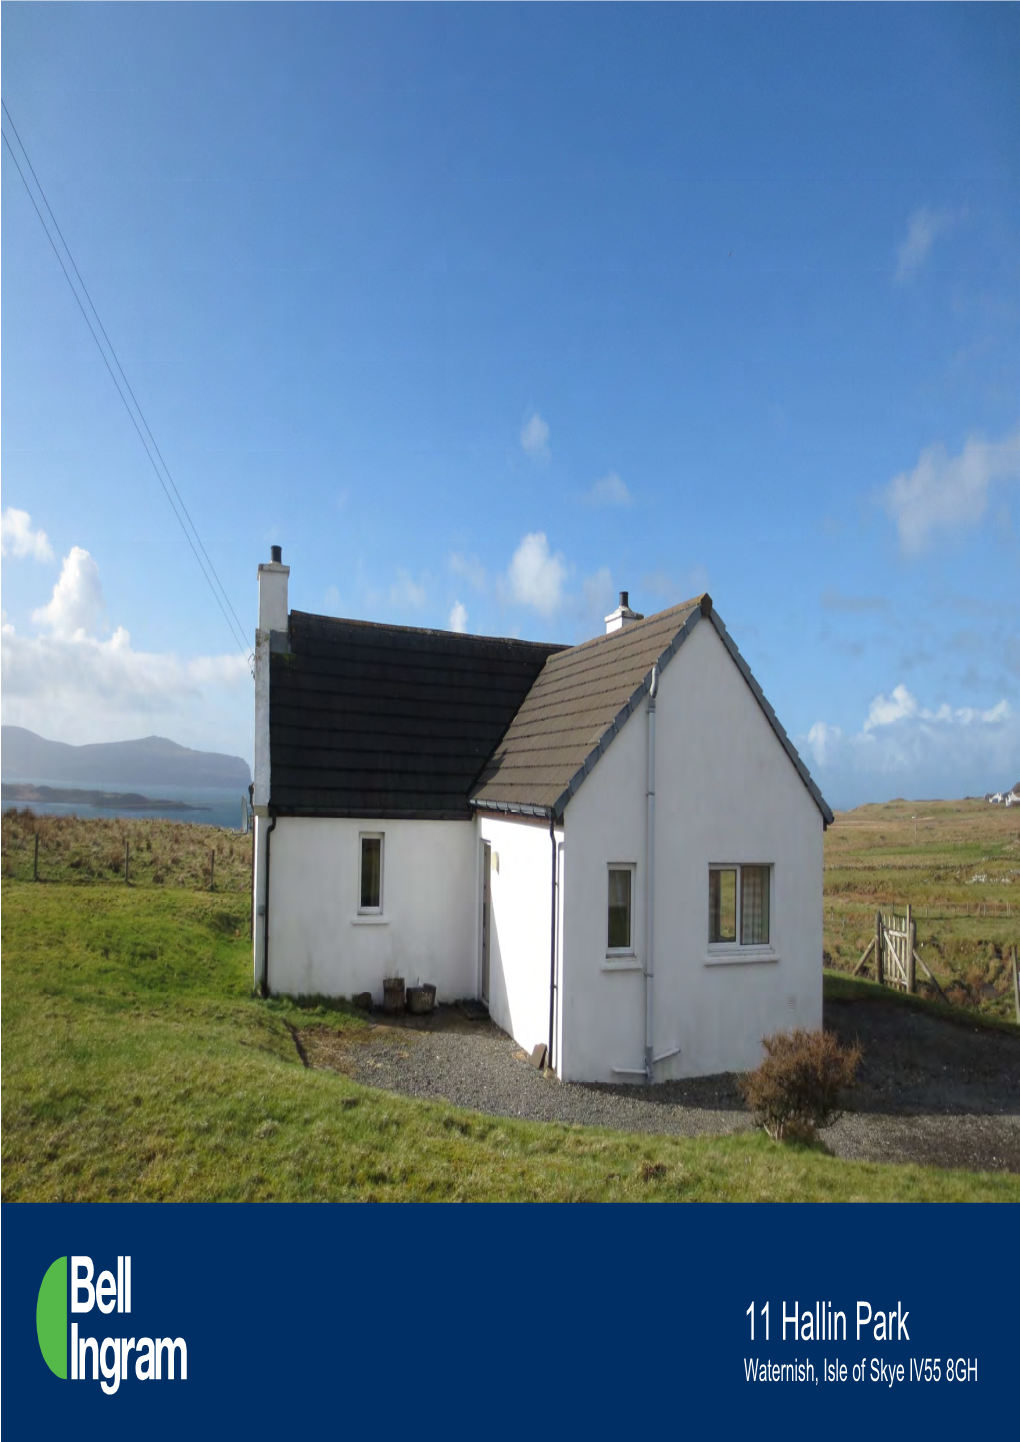 11 Hallin Park Waternish, Isle of Skye IV55 8GH Beautifully Situated Detached Cottage on the Sought After Village of Waternish